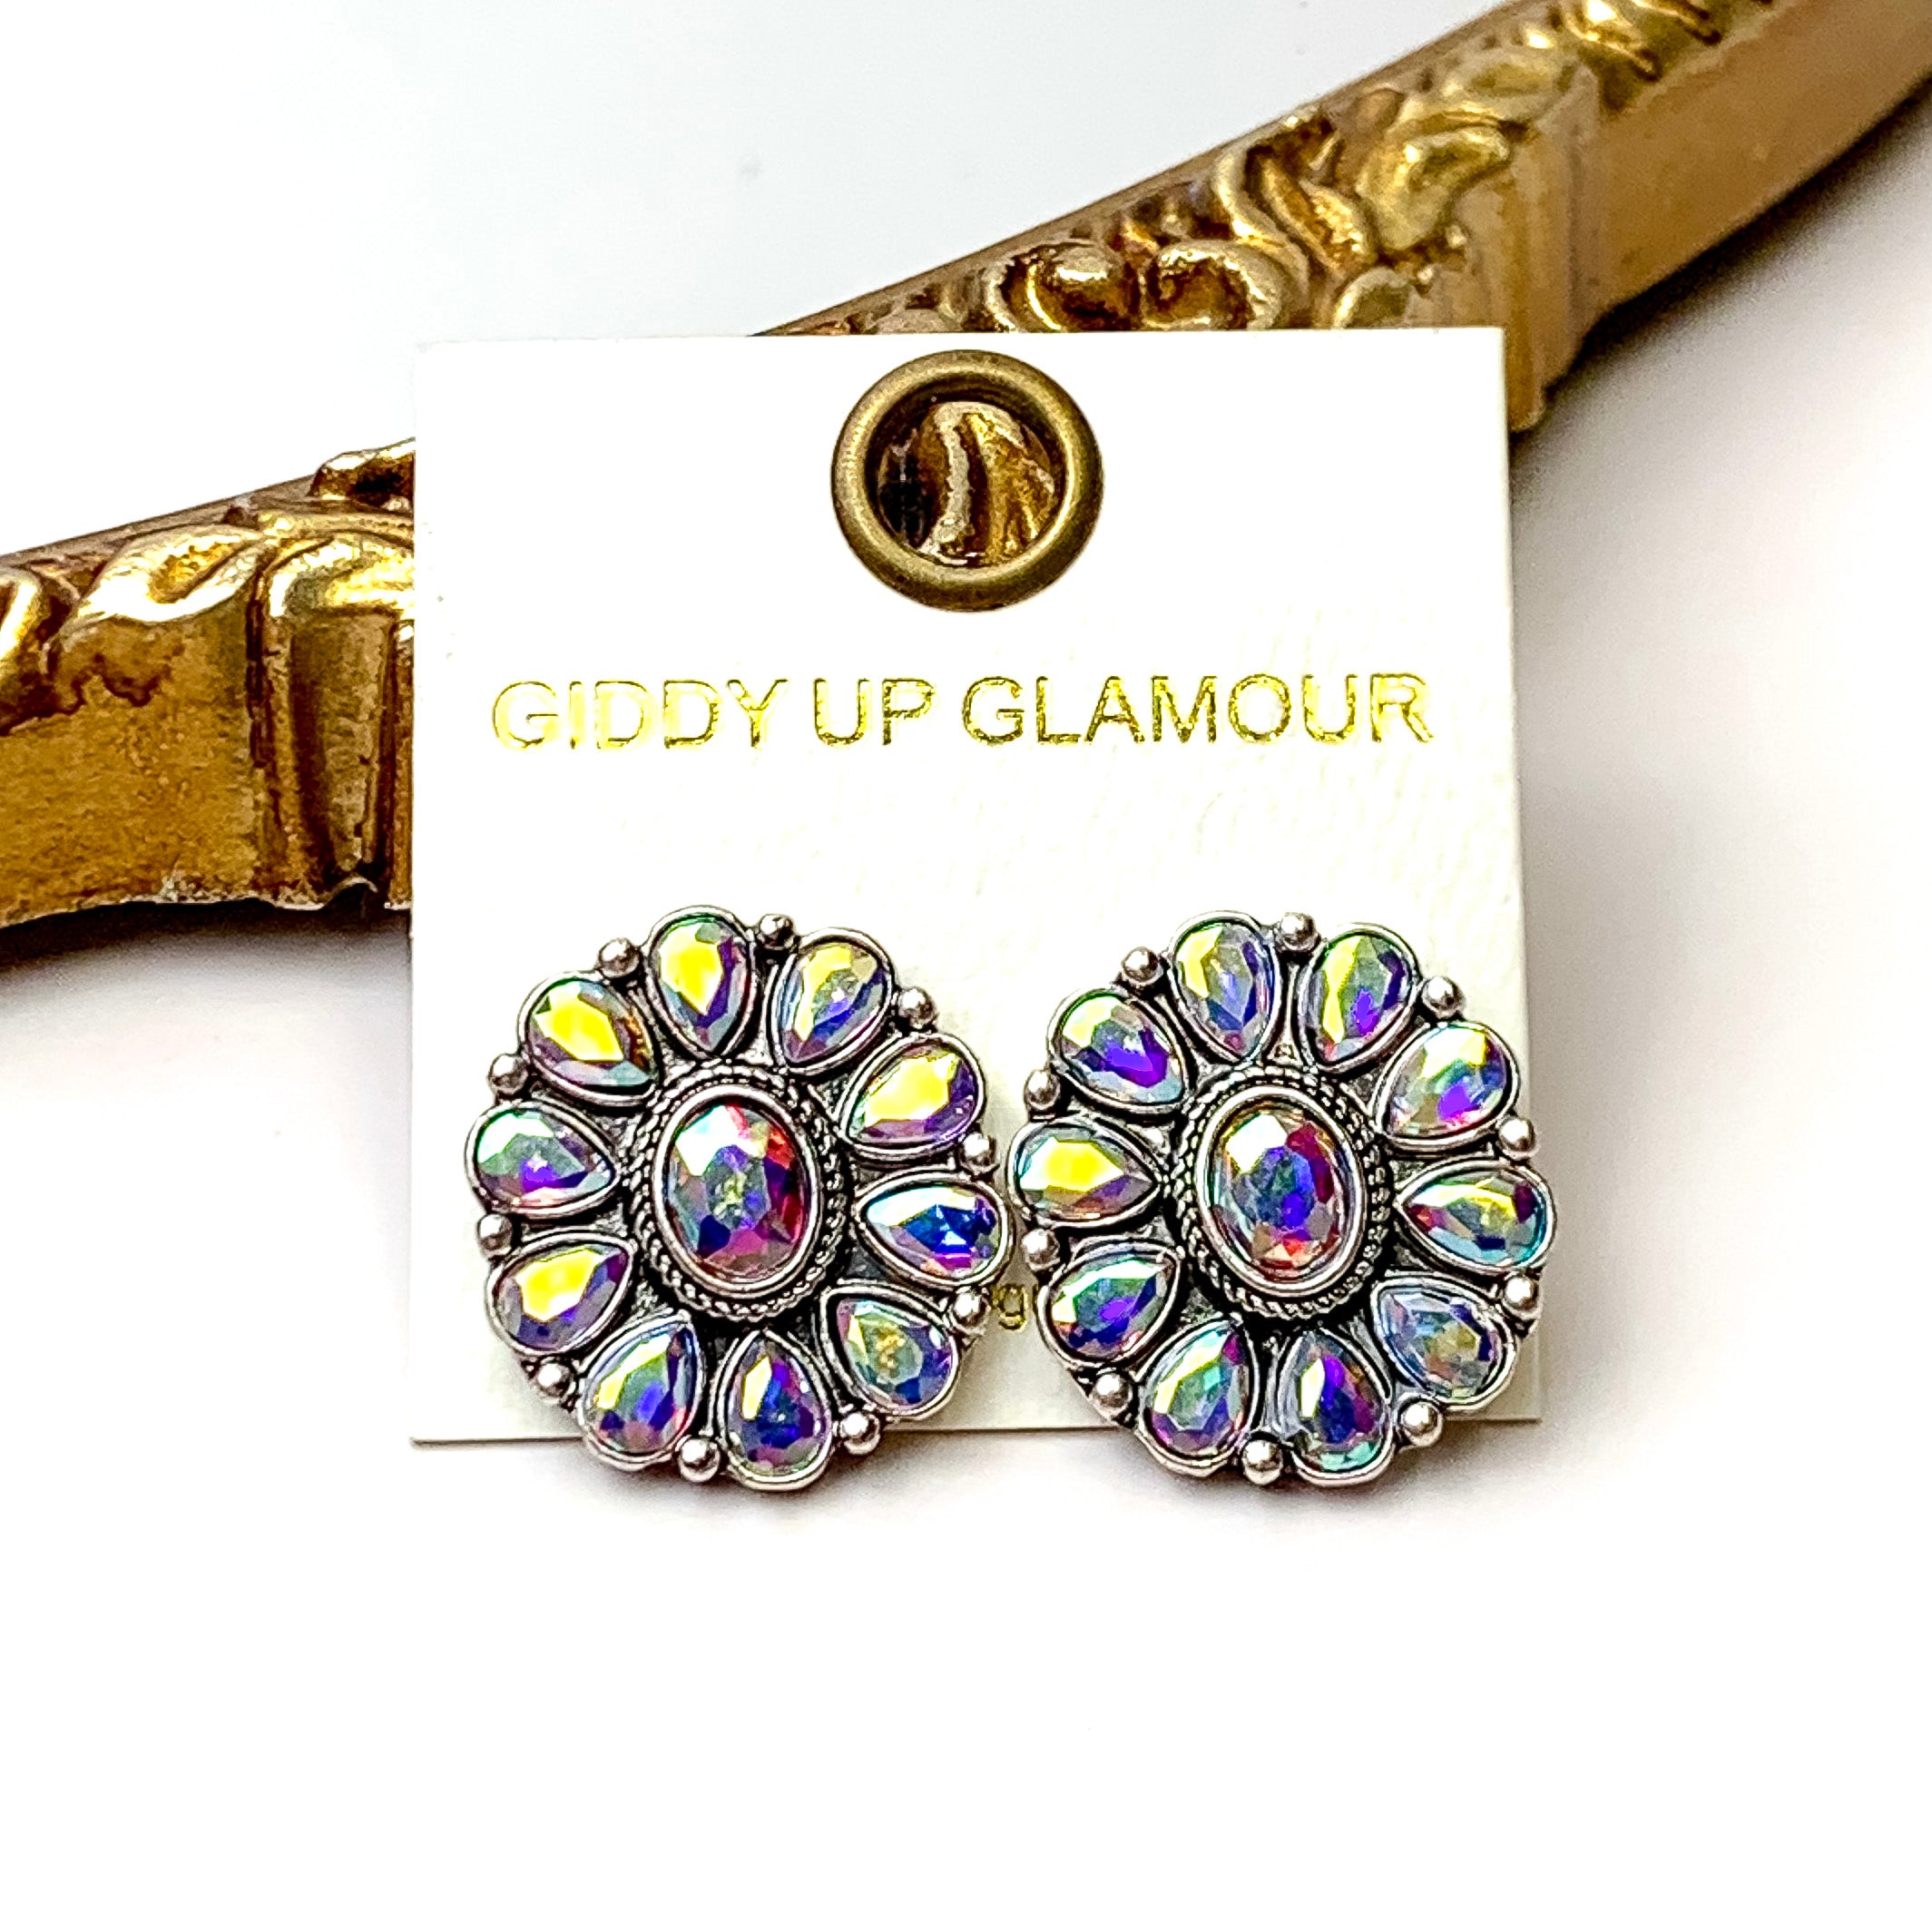 Prismatic Petal AB Stone Flower Concho Stud Earrings in Silver Tone - Giddy Up Glamour Boutique